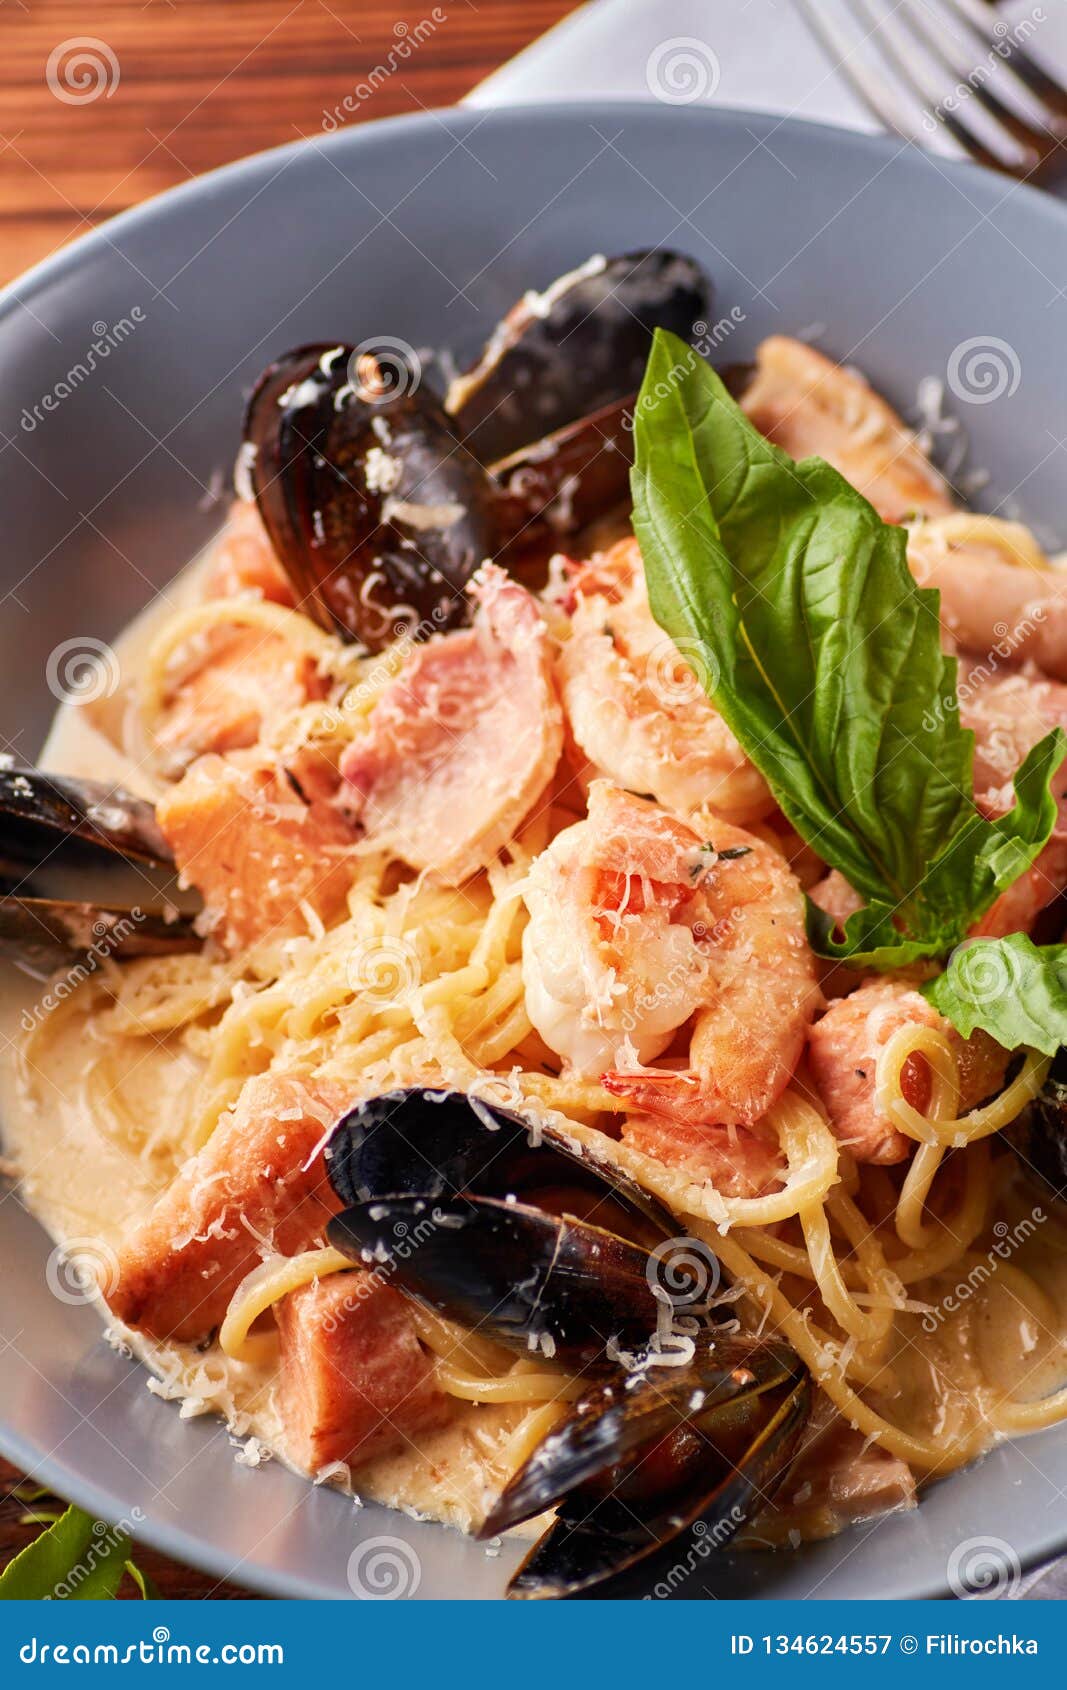 Seafood Pasta with Mussels, Squid, Salmon, Prawns Stock Image - Image ...